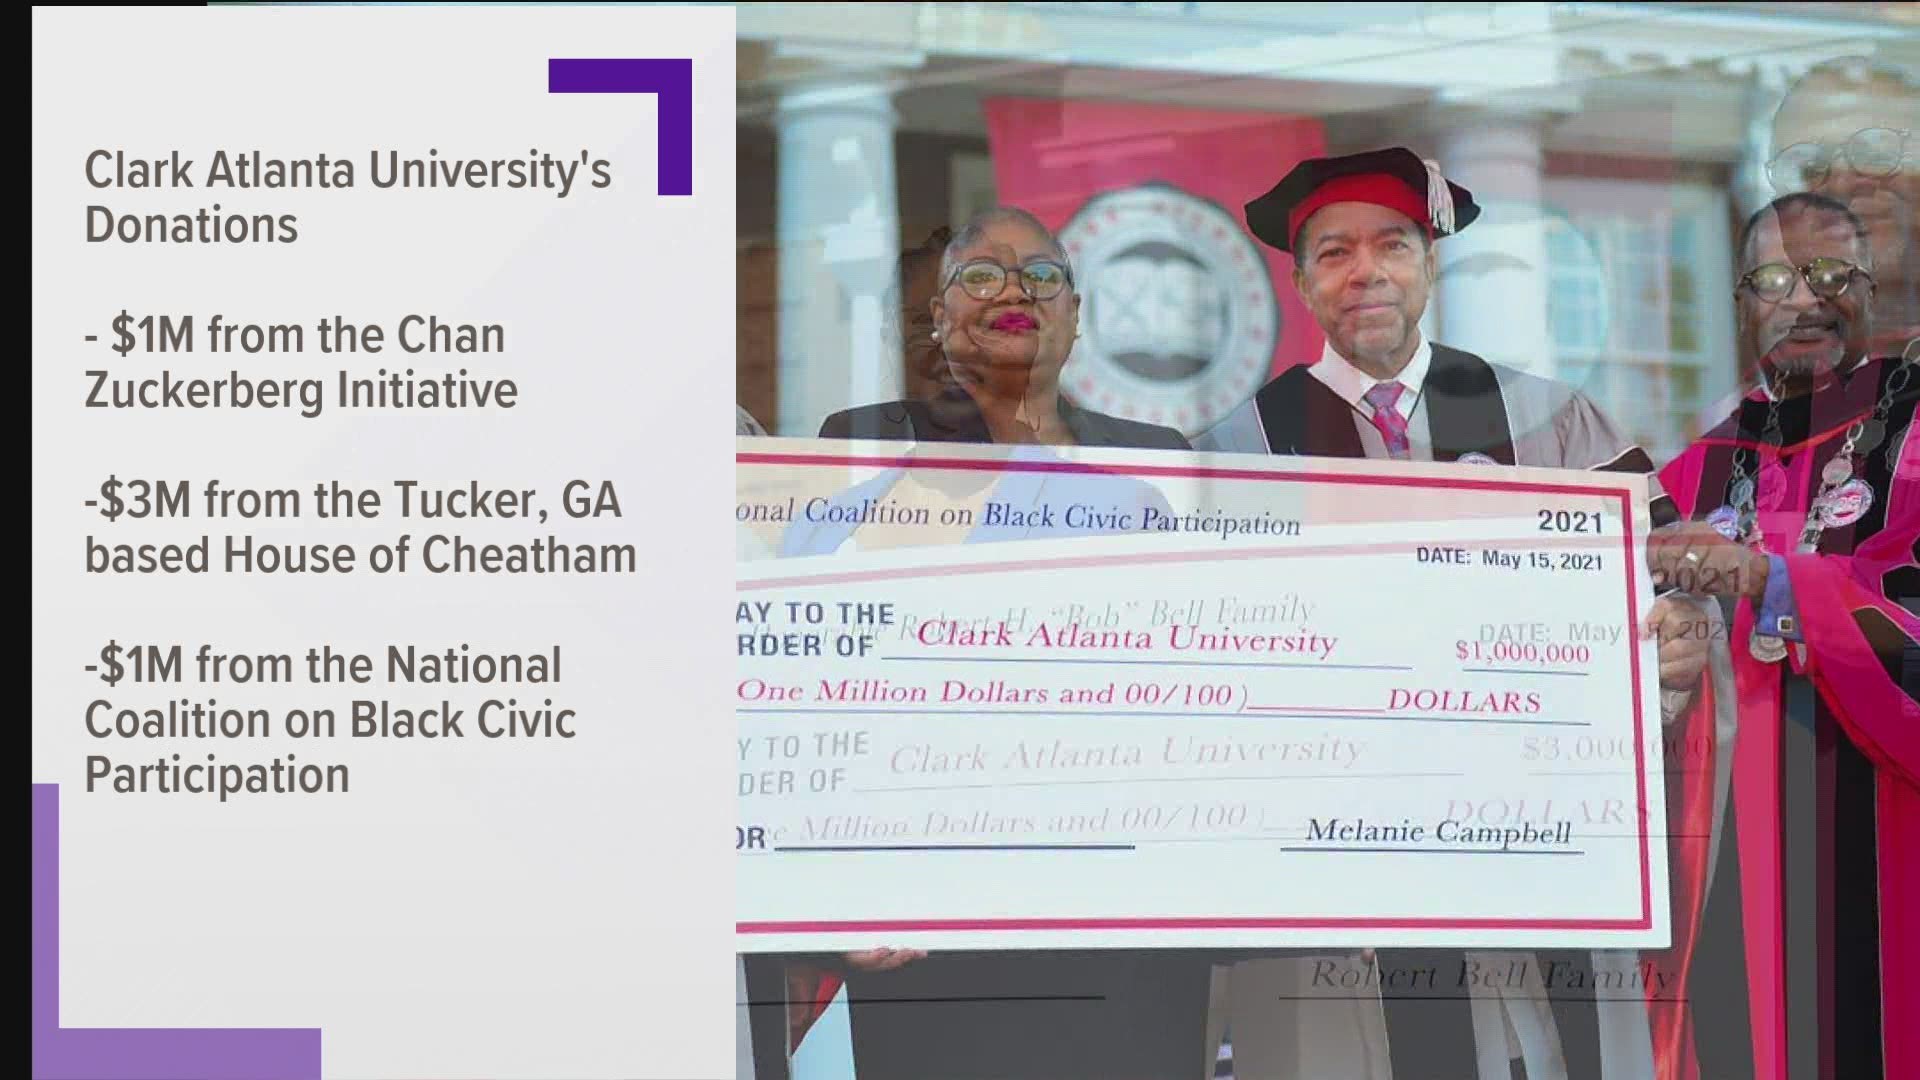 Clark Atlanta said the gifts they received will help develop the next generation of entrepreneurs, social justice advocates, and civic leaders.